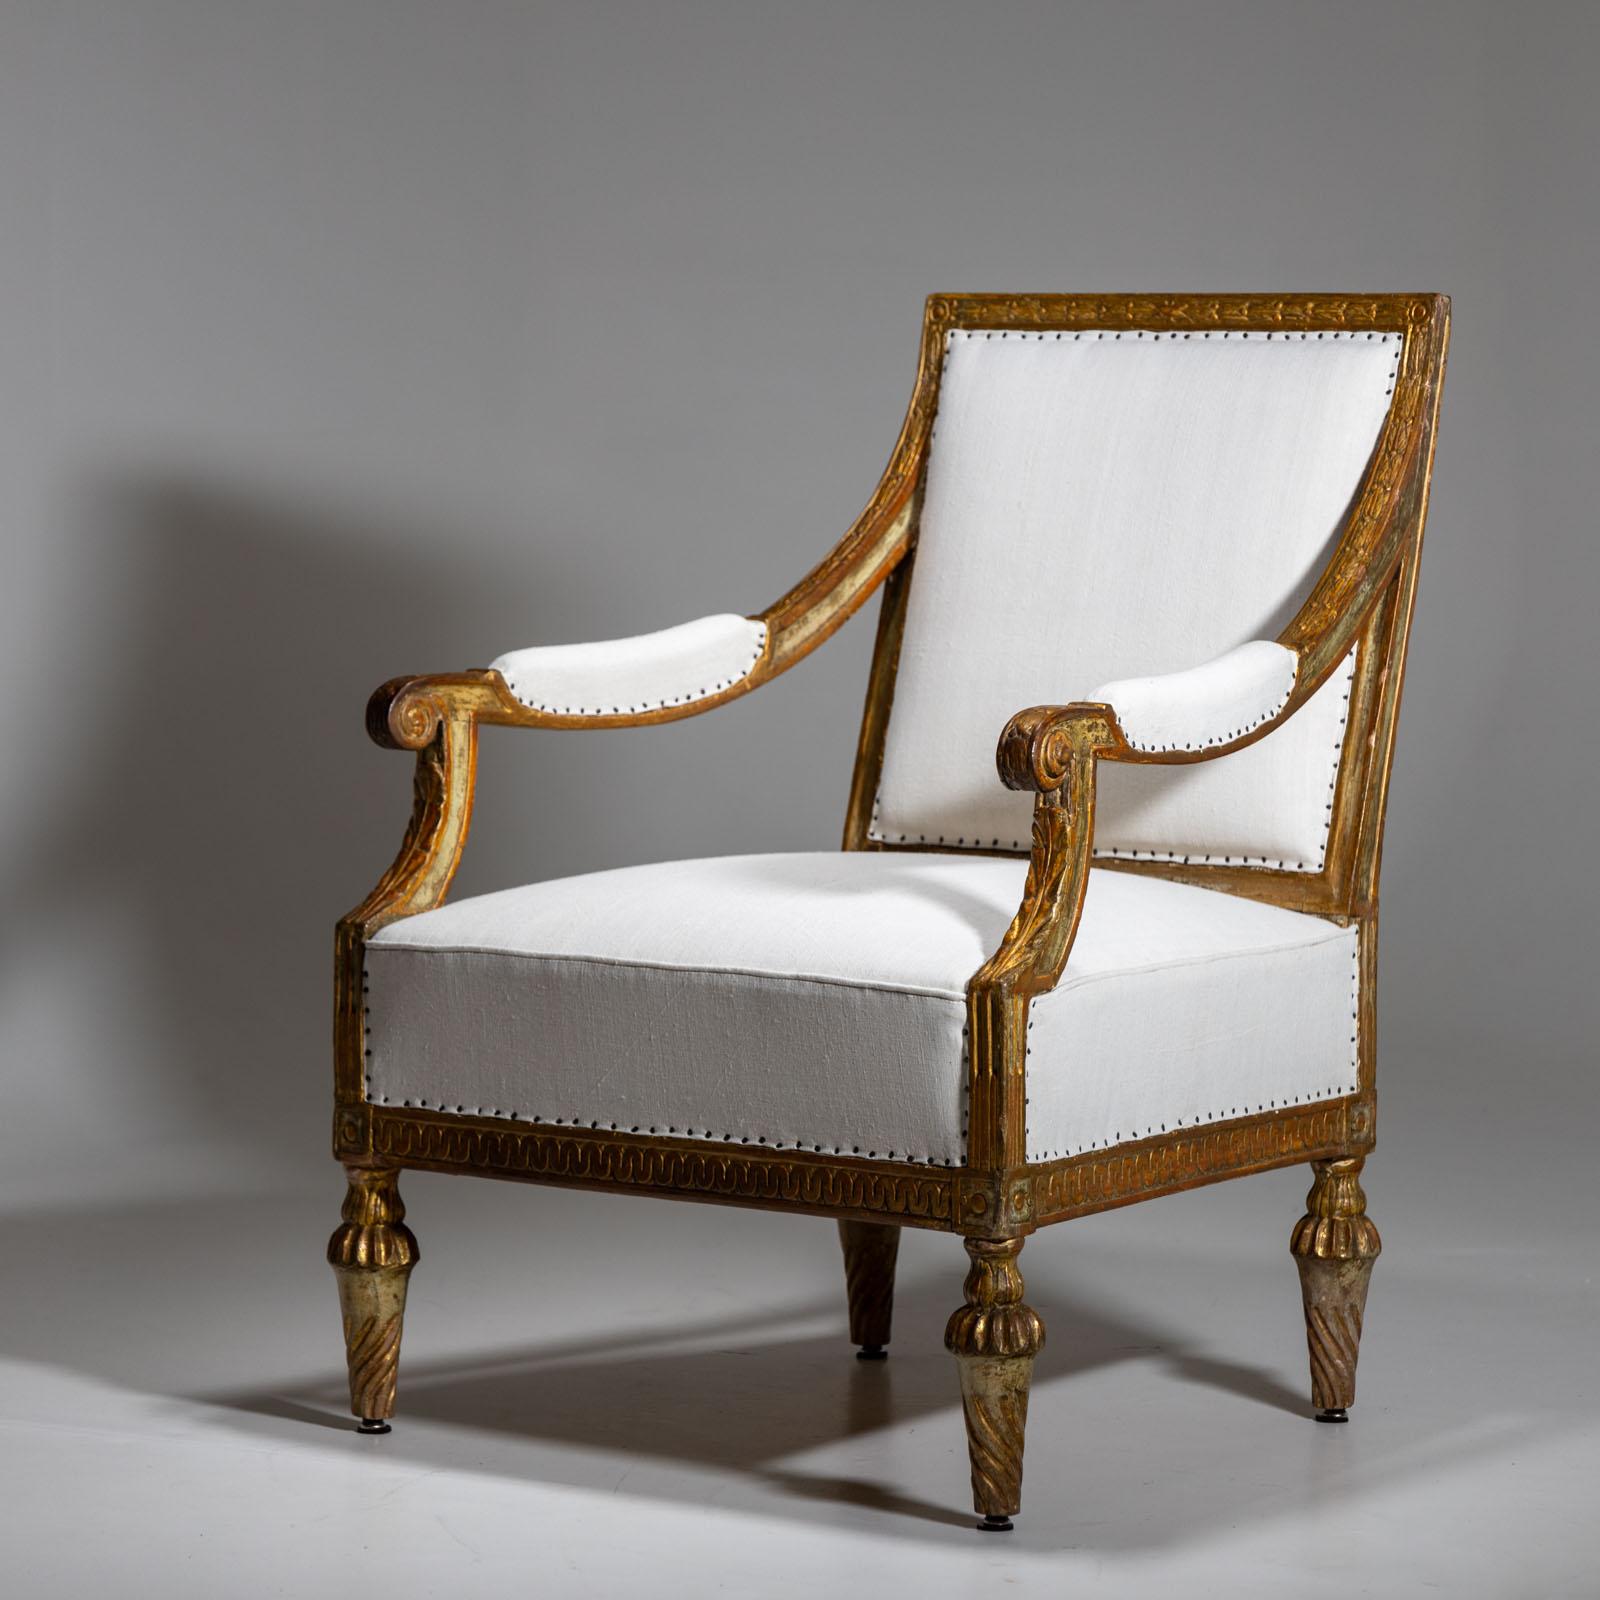 Large gold-patinated Louis Seize armchair on turned-channeled legs and scalloped band on the frame as well as carved leaf decorations on the armrests and backrest. The armchair has a wide seat and the backrest and armrests are also upholstered. The